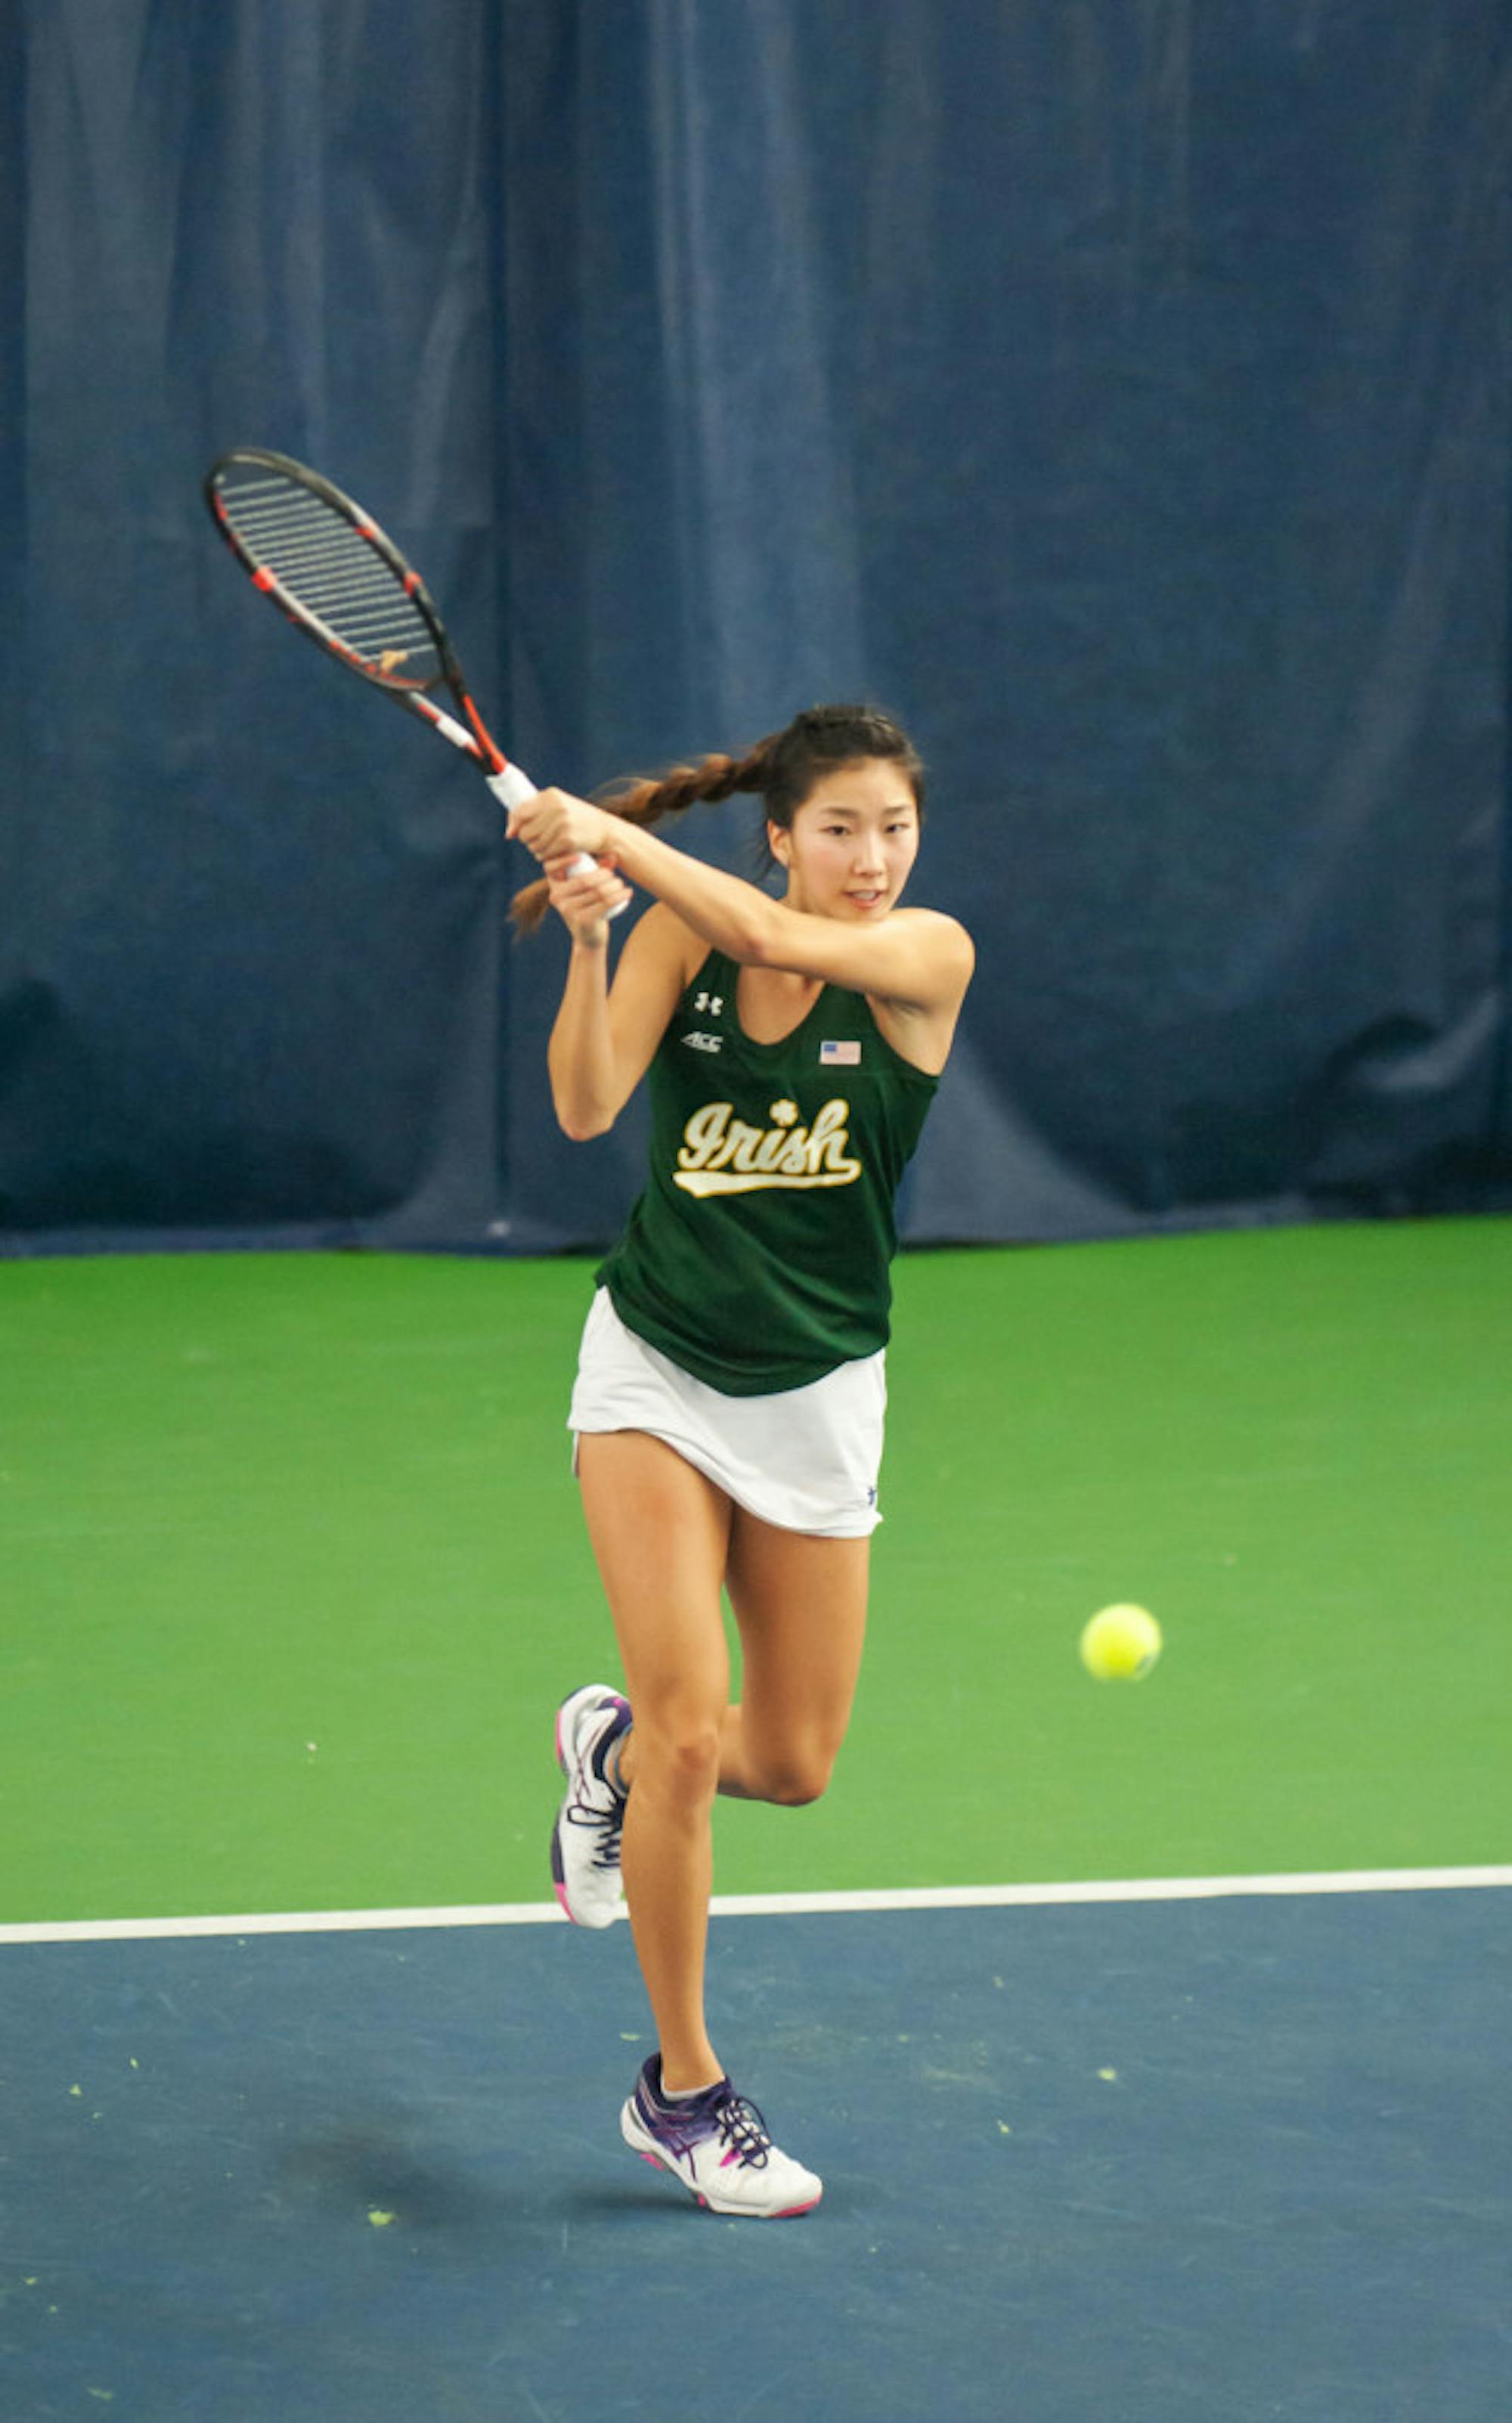 Notre Dame sophomore Rachel Chong follows through on a hit during a 5-2 Irish victory over Purdue at Eck Tennis Center.